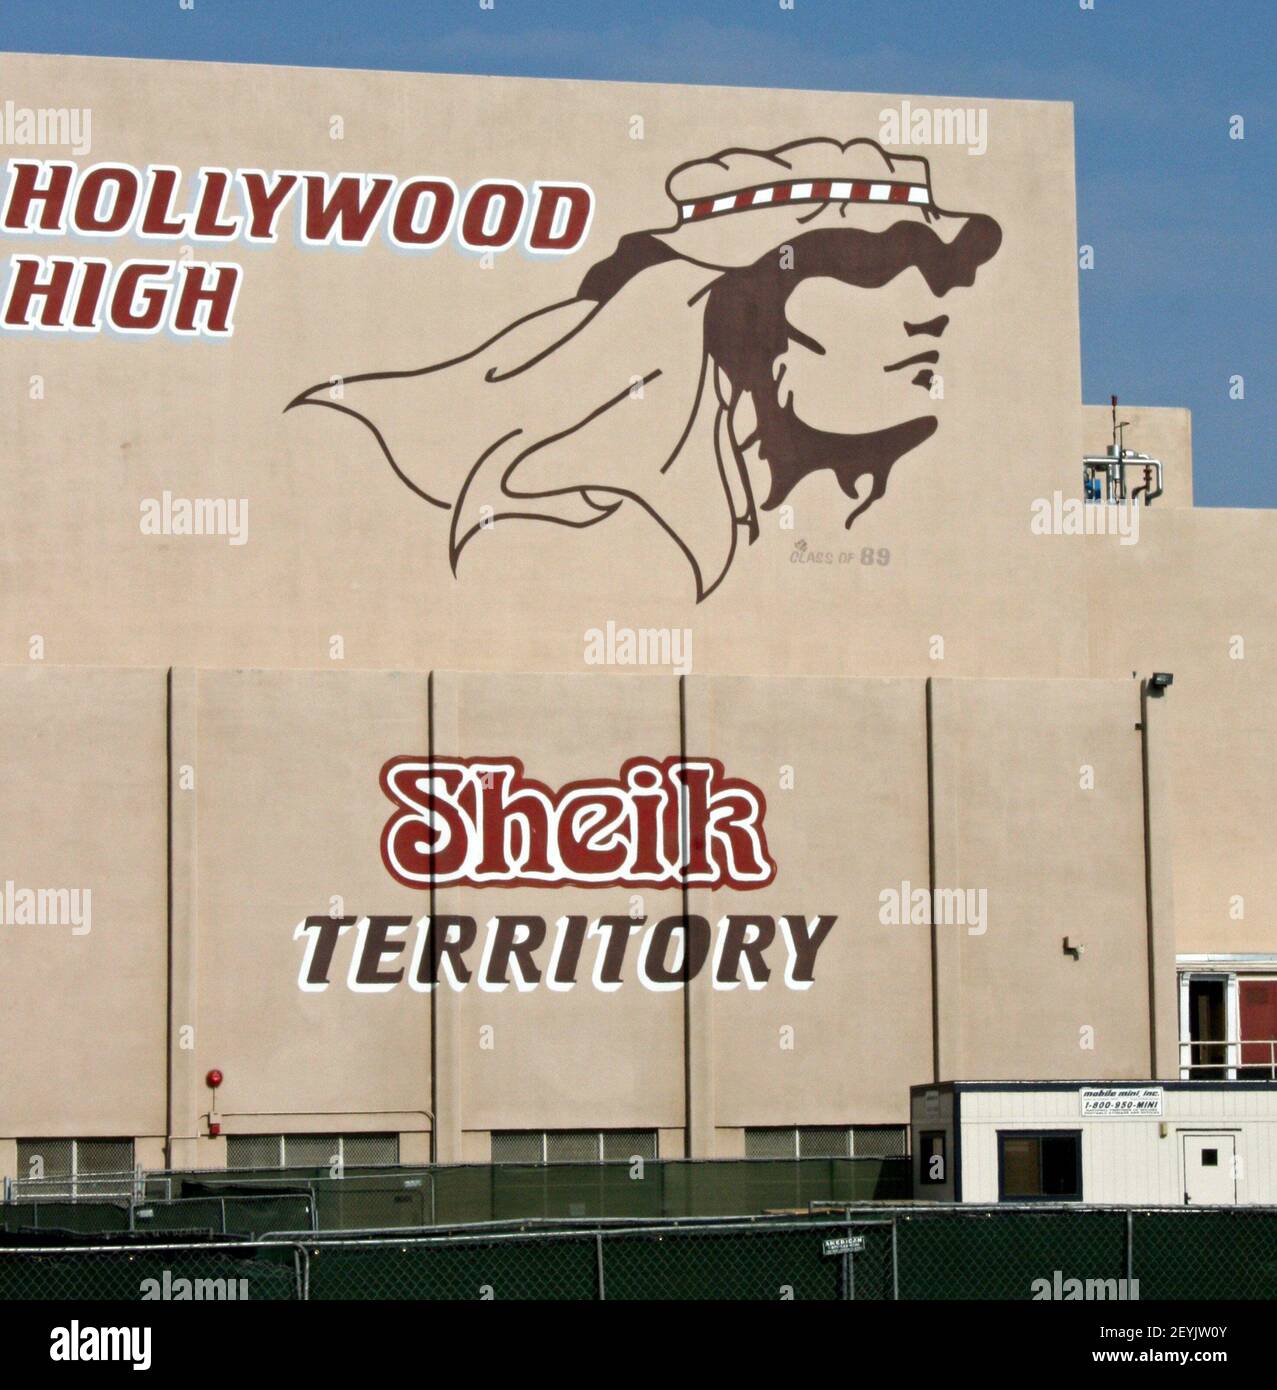 Hollywood High School's mascot is the Sheiks, and a portrait of